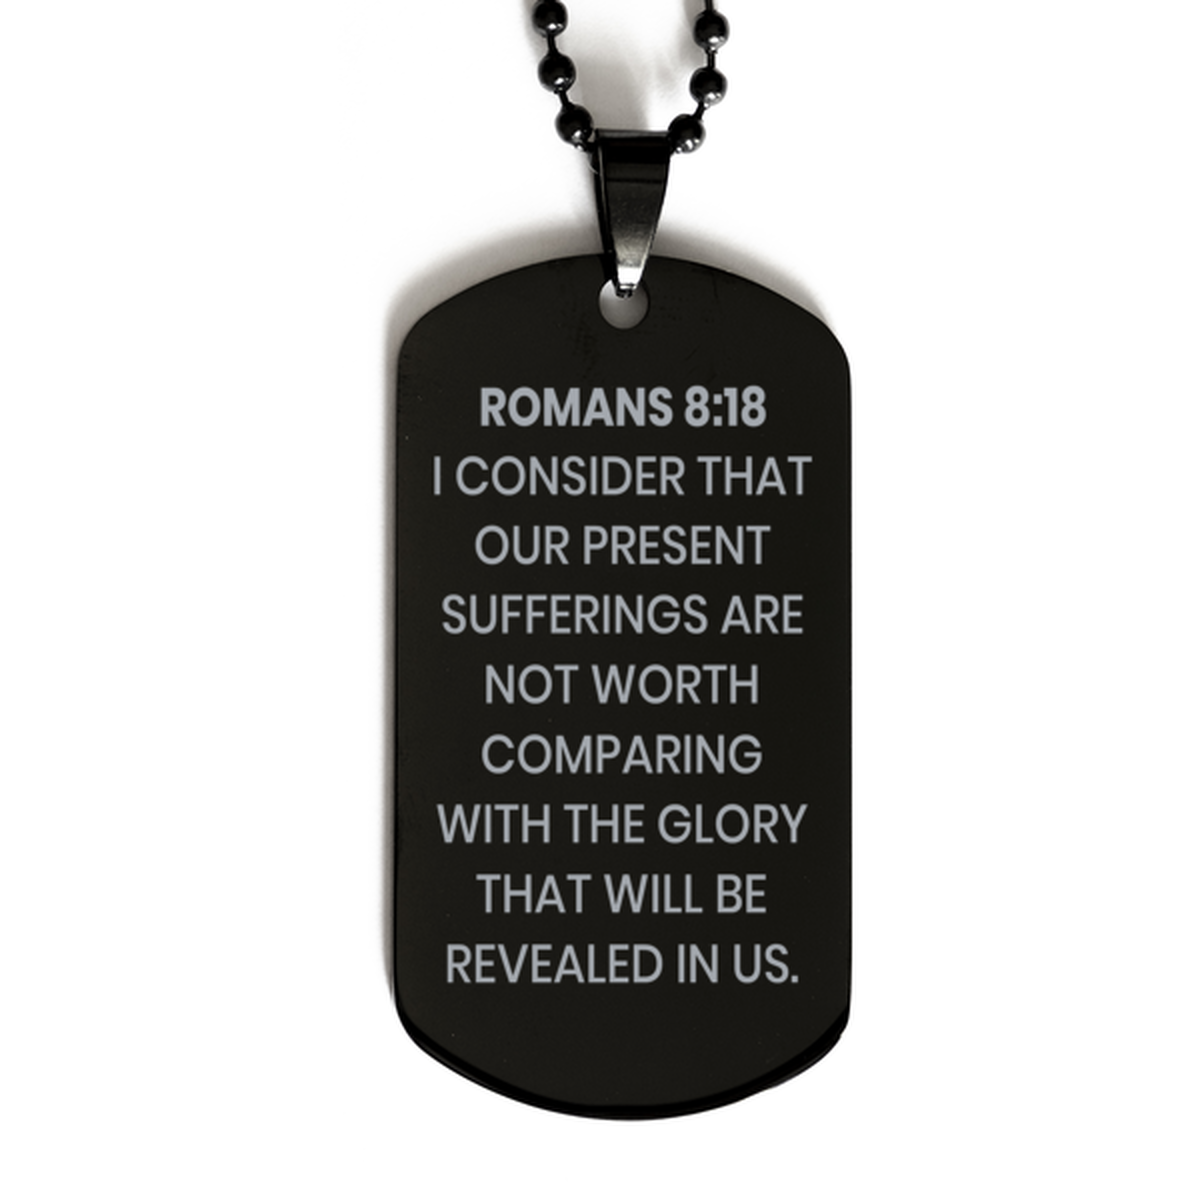 Romans 8:18 Necklace, Bible Verse Necklace, Christian Necklace, Christian Birthday Gift, Black Dog Tag Necklace, Gift for Christian.